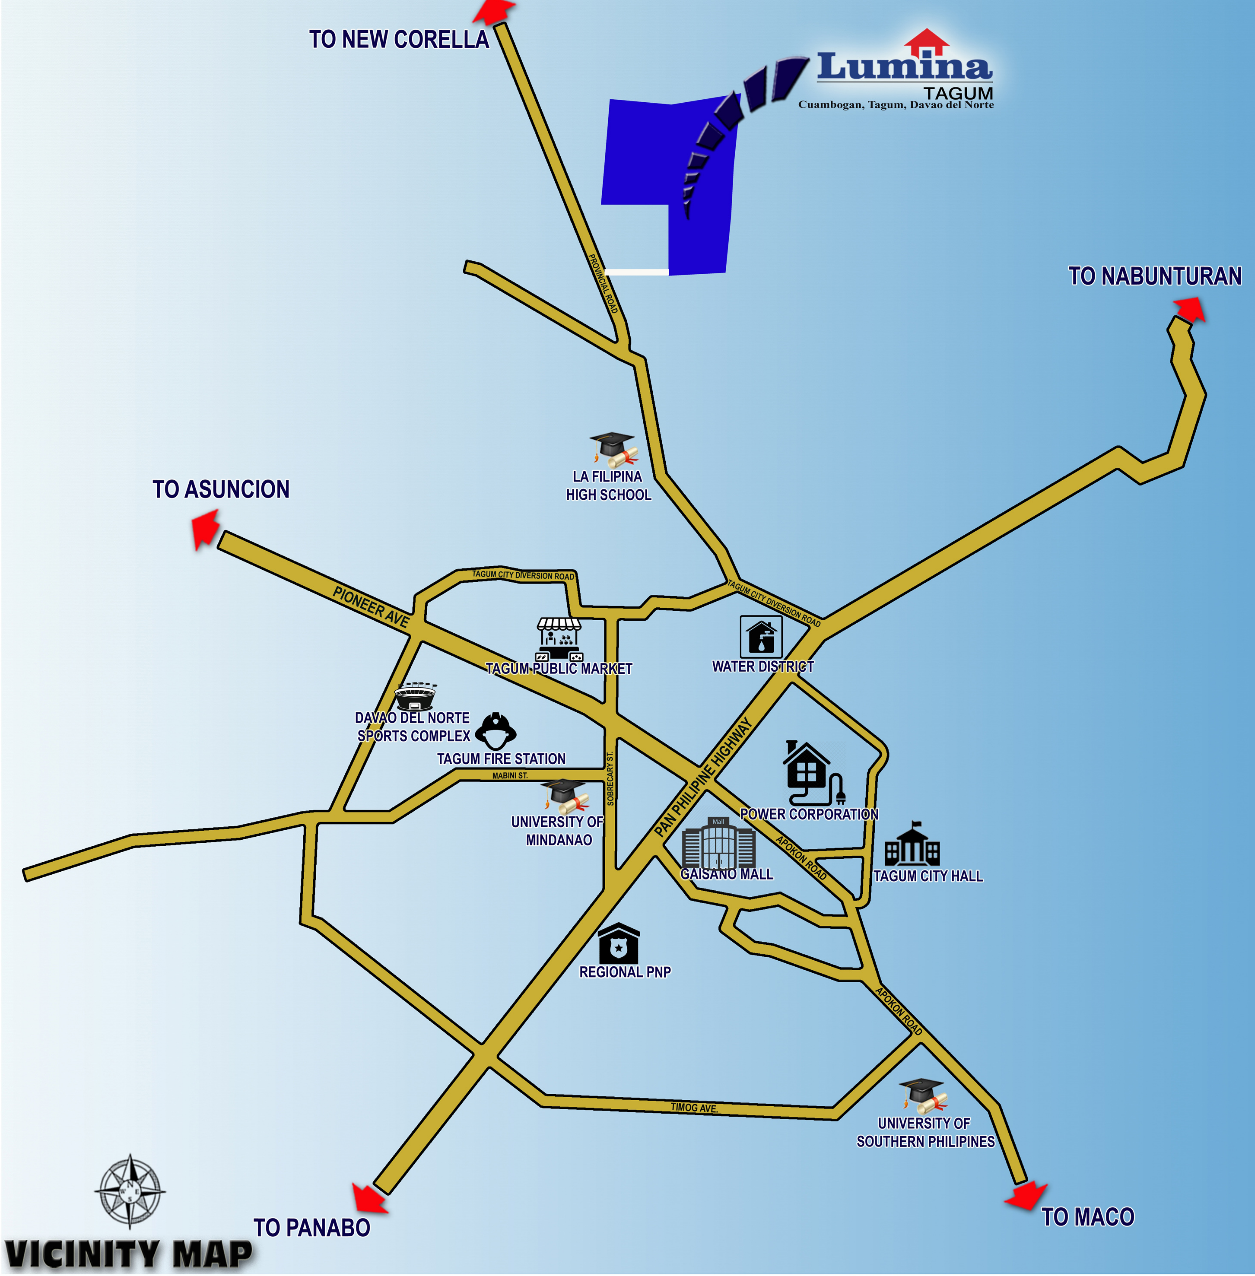 VICINITY-MAP-1635045919.png